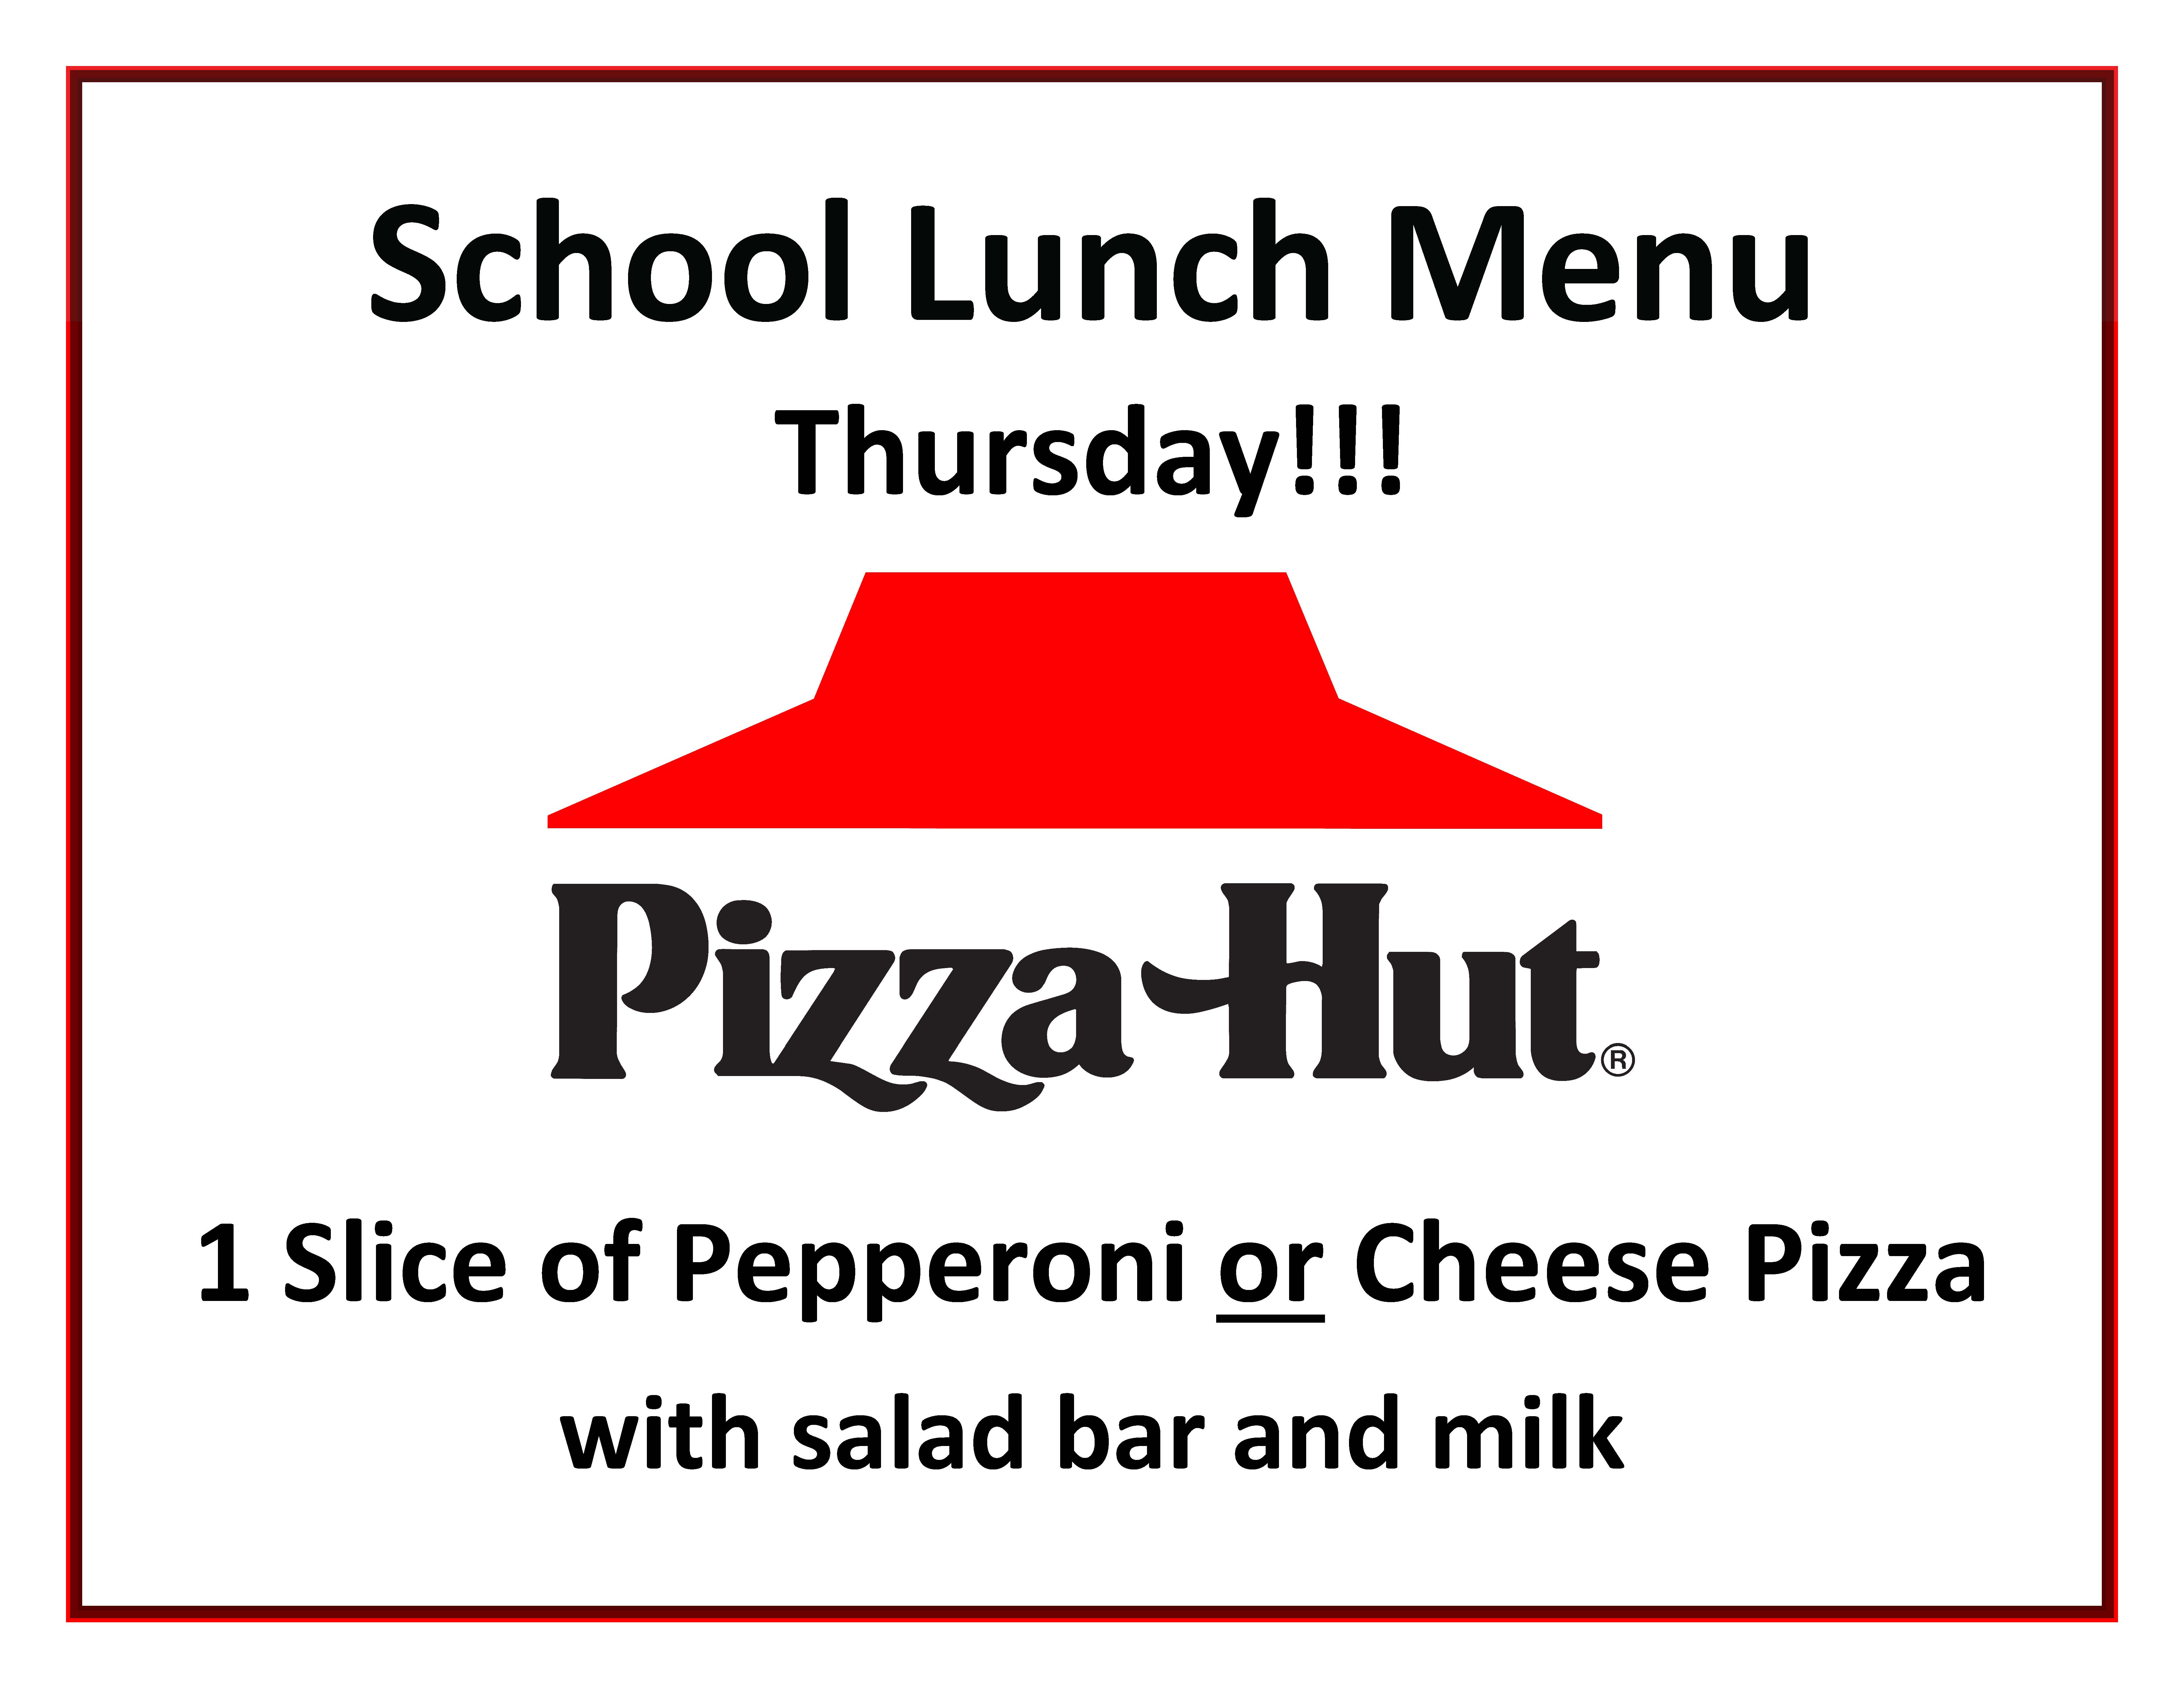 Pizza Hut Day in the school cafeteria--May 23